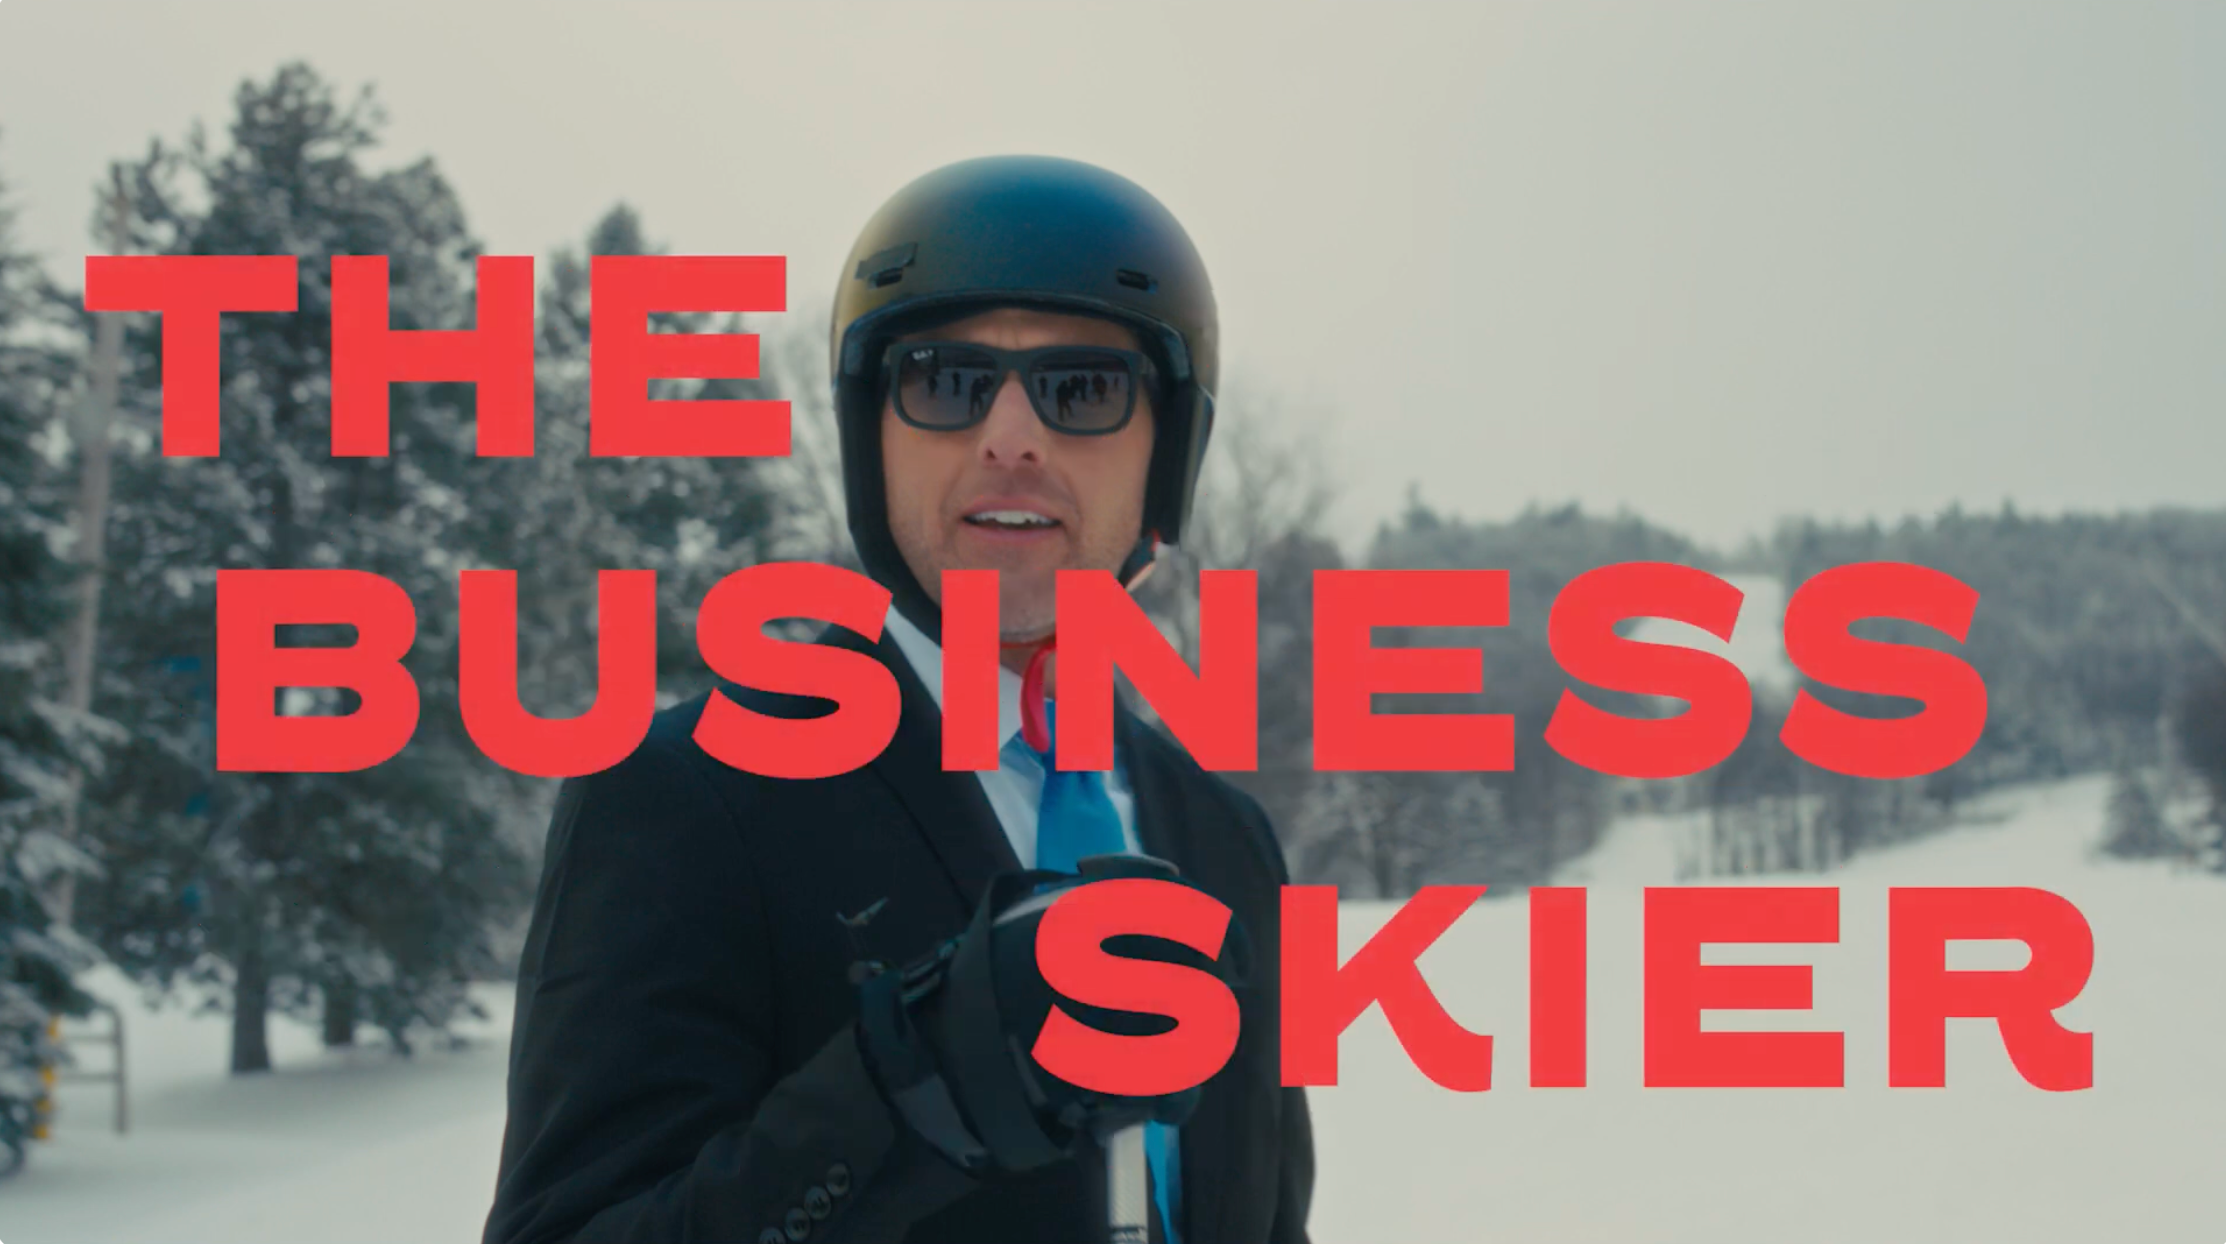 Artwork sample from "The Business Skier"